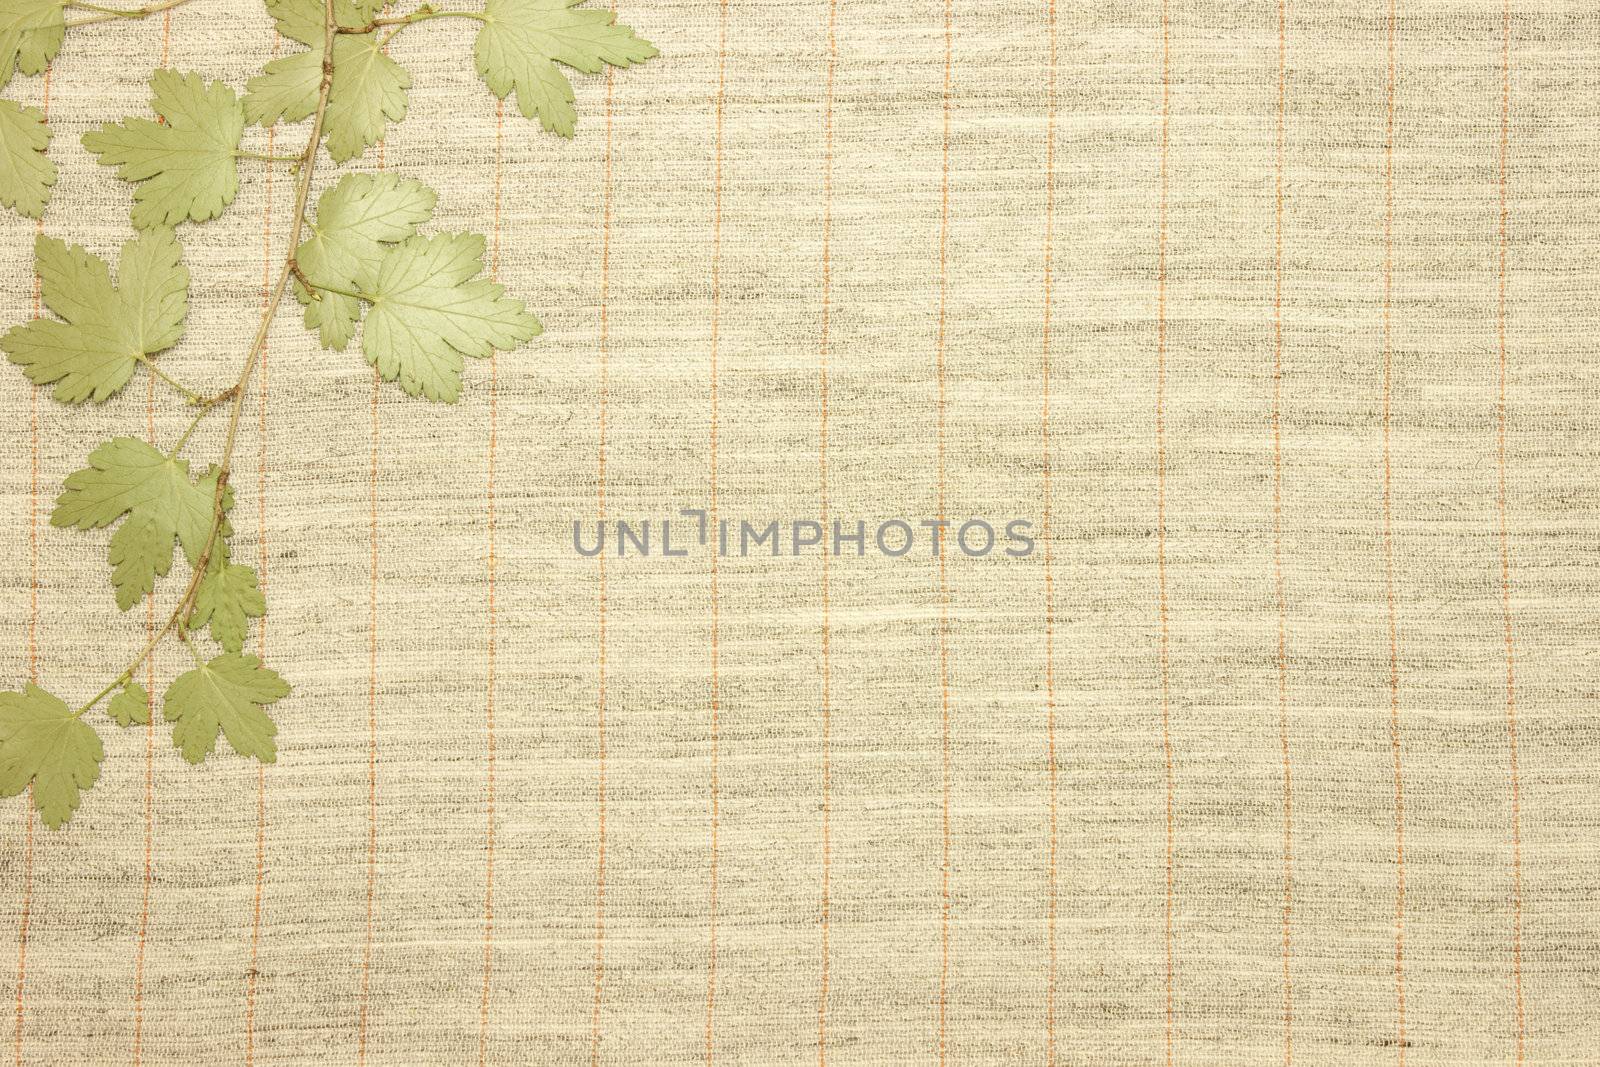 Dried green leaves over fabric textile by Arsen